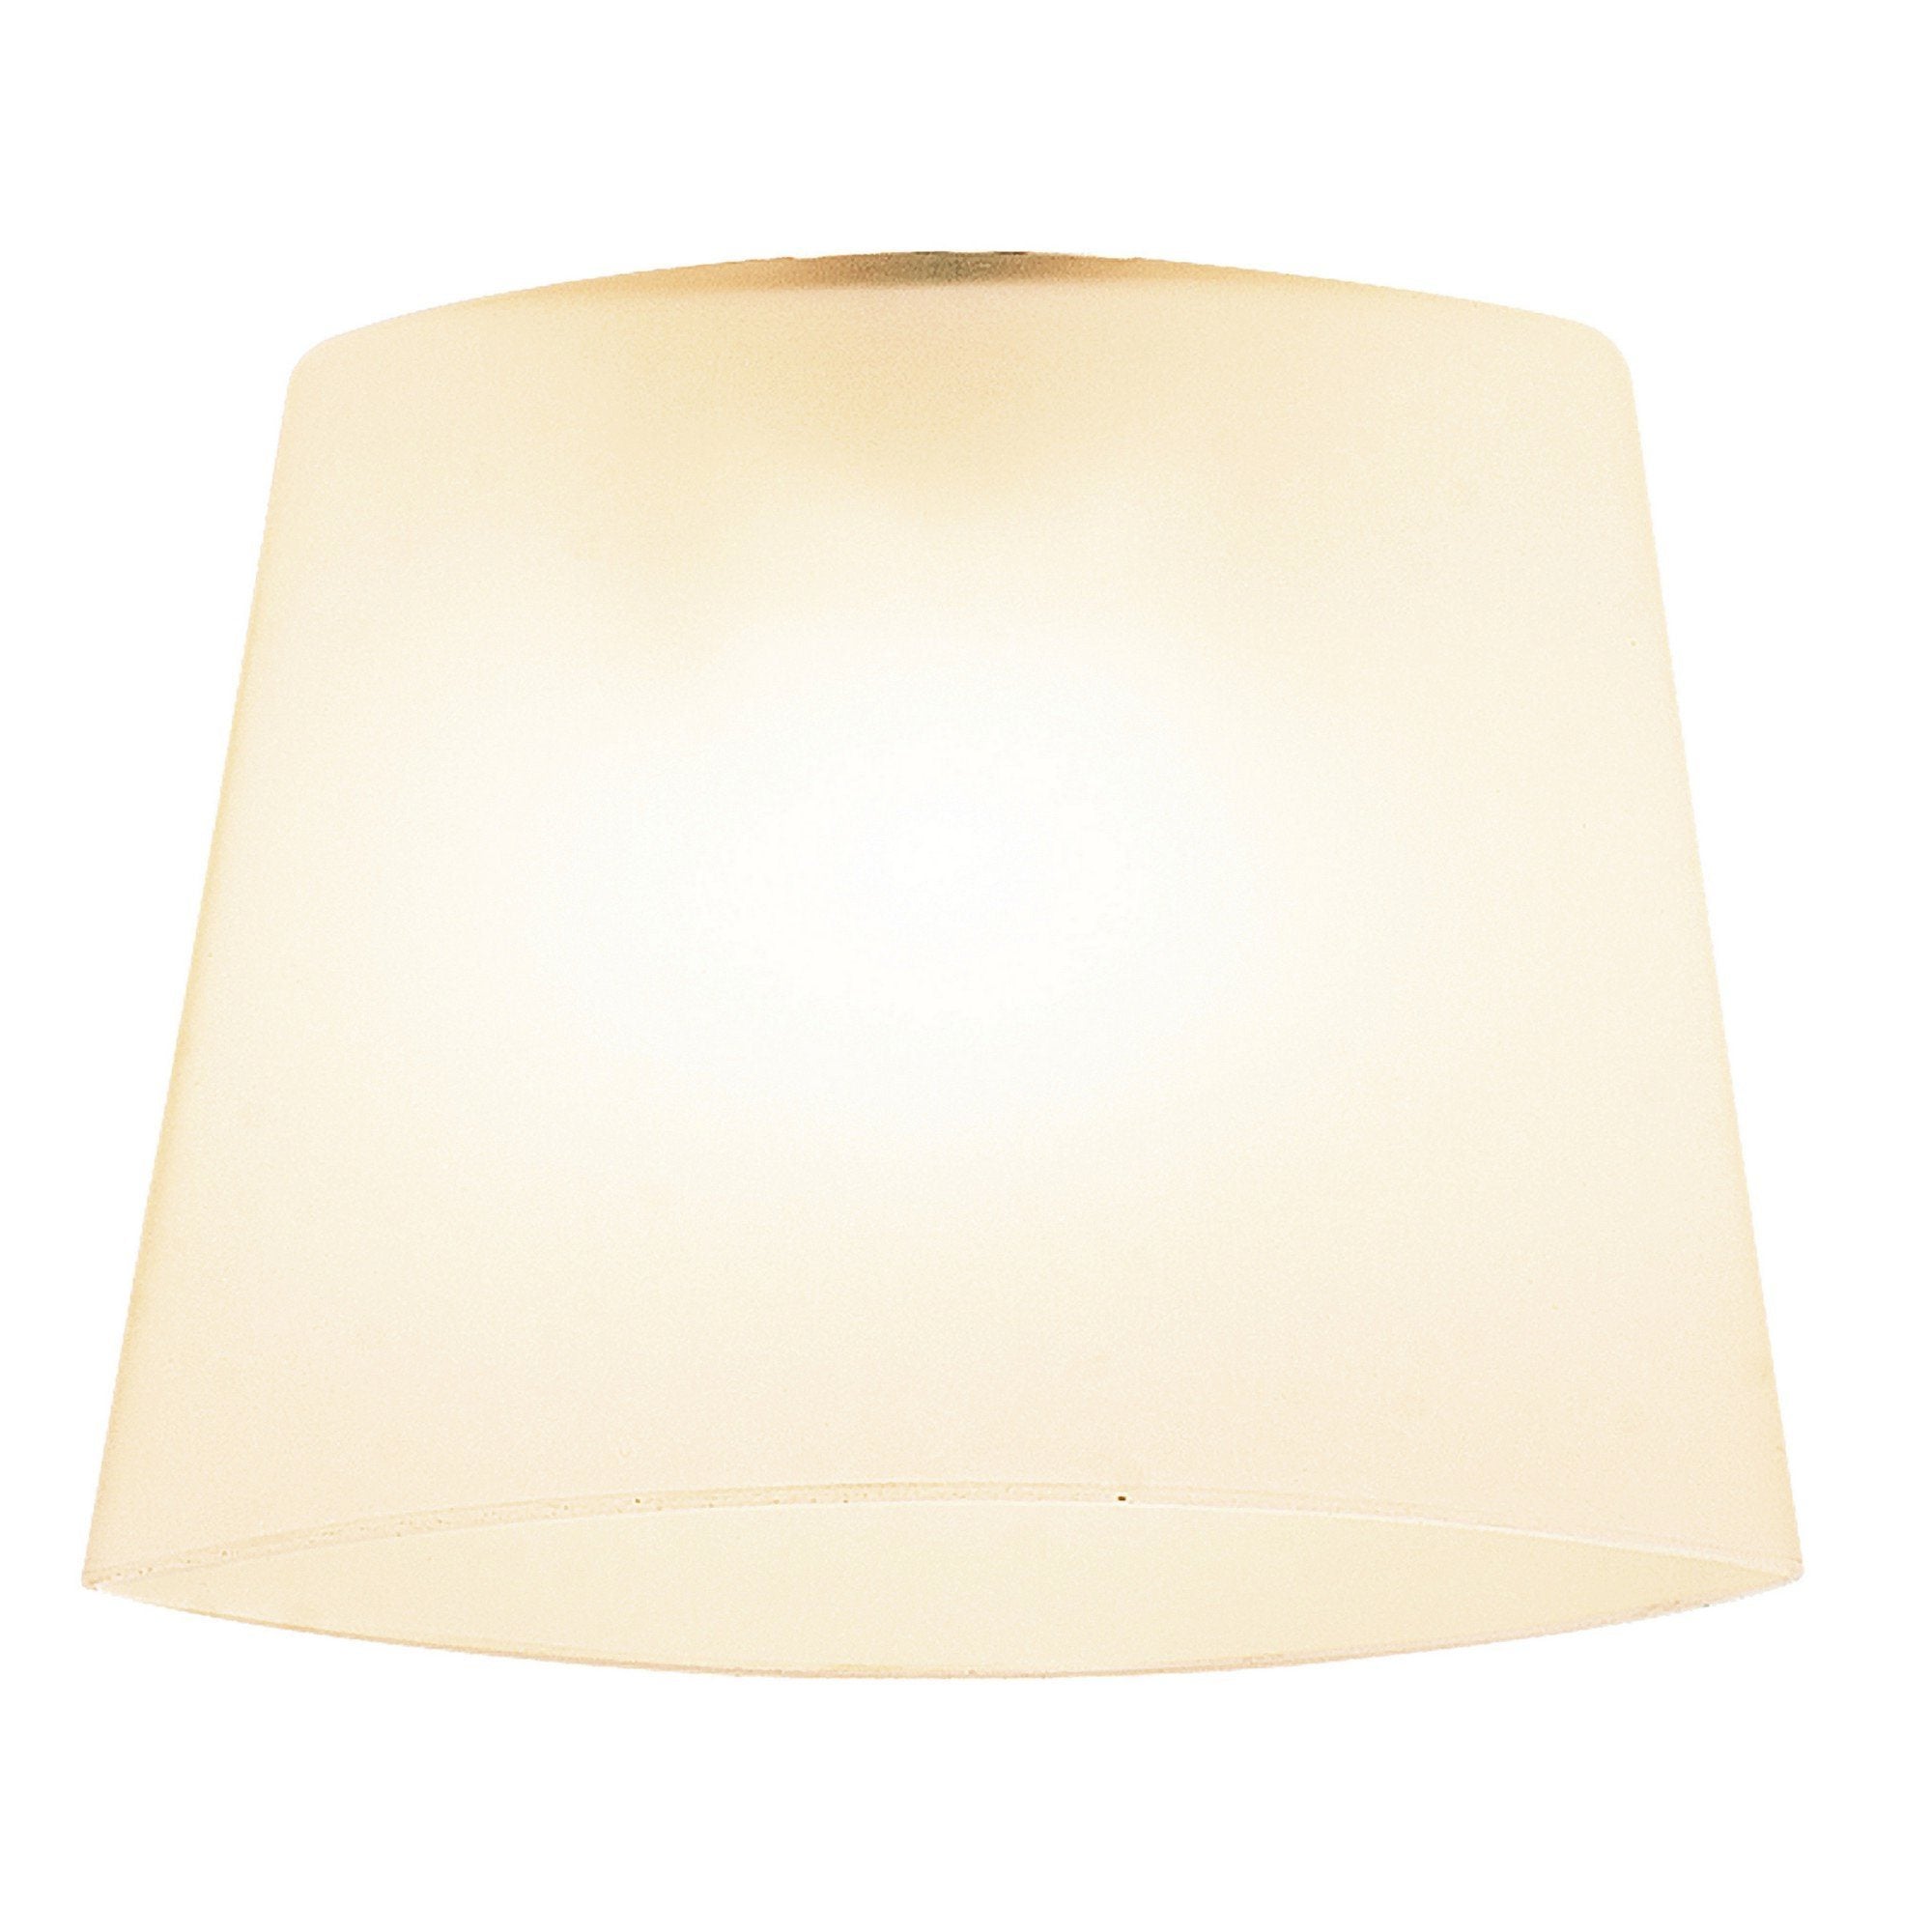 Thea Oval Cased Glass - Opal Shade Ceiling Access Lighting 